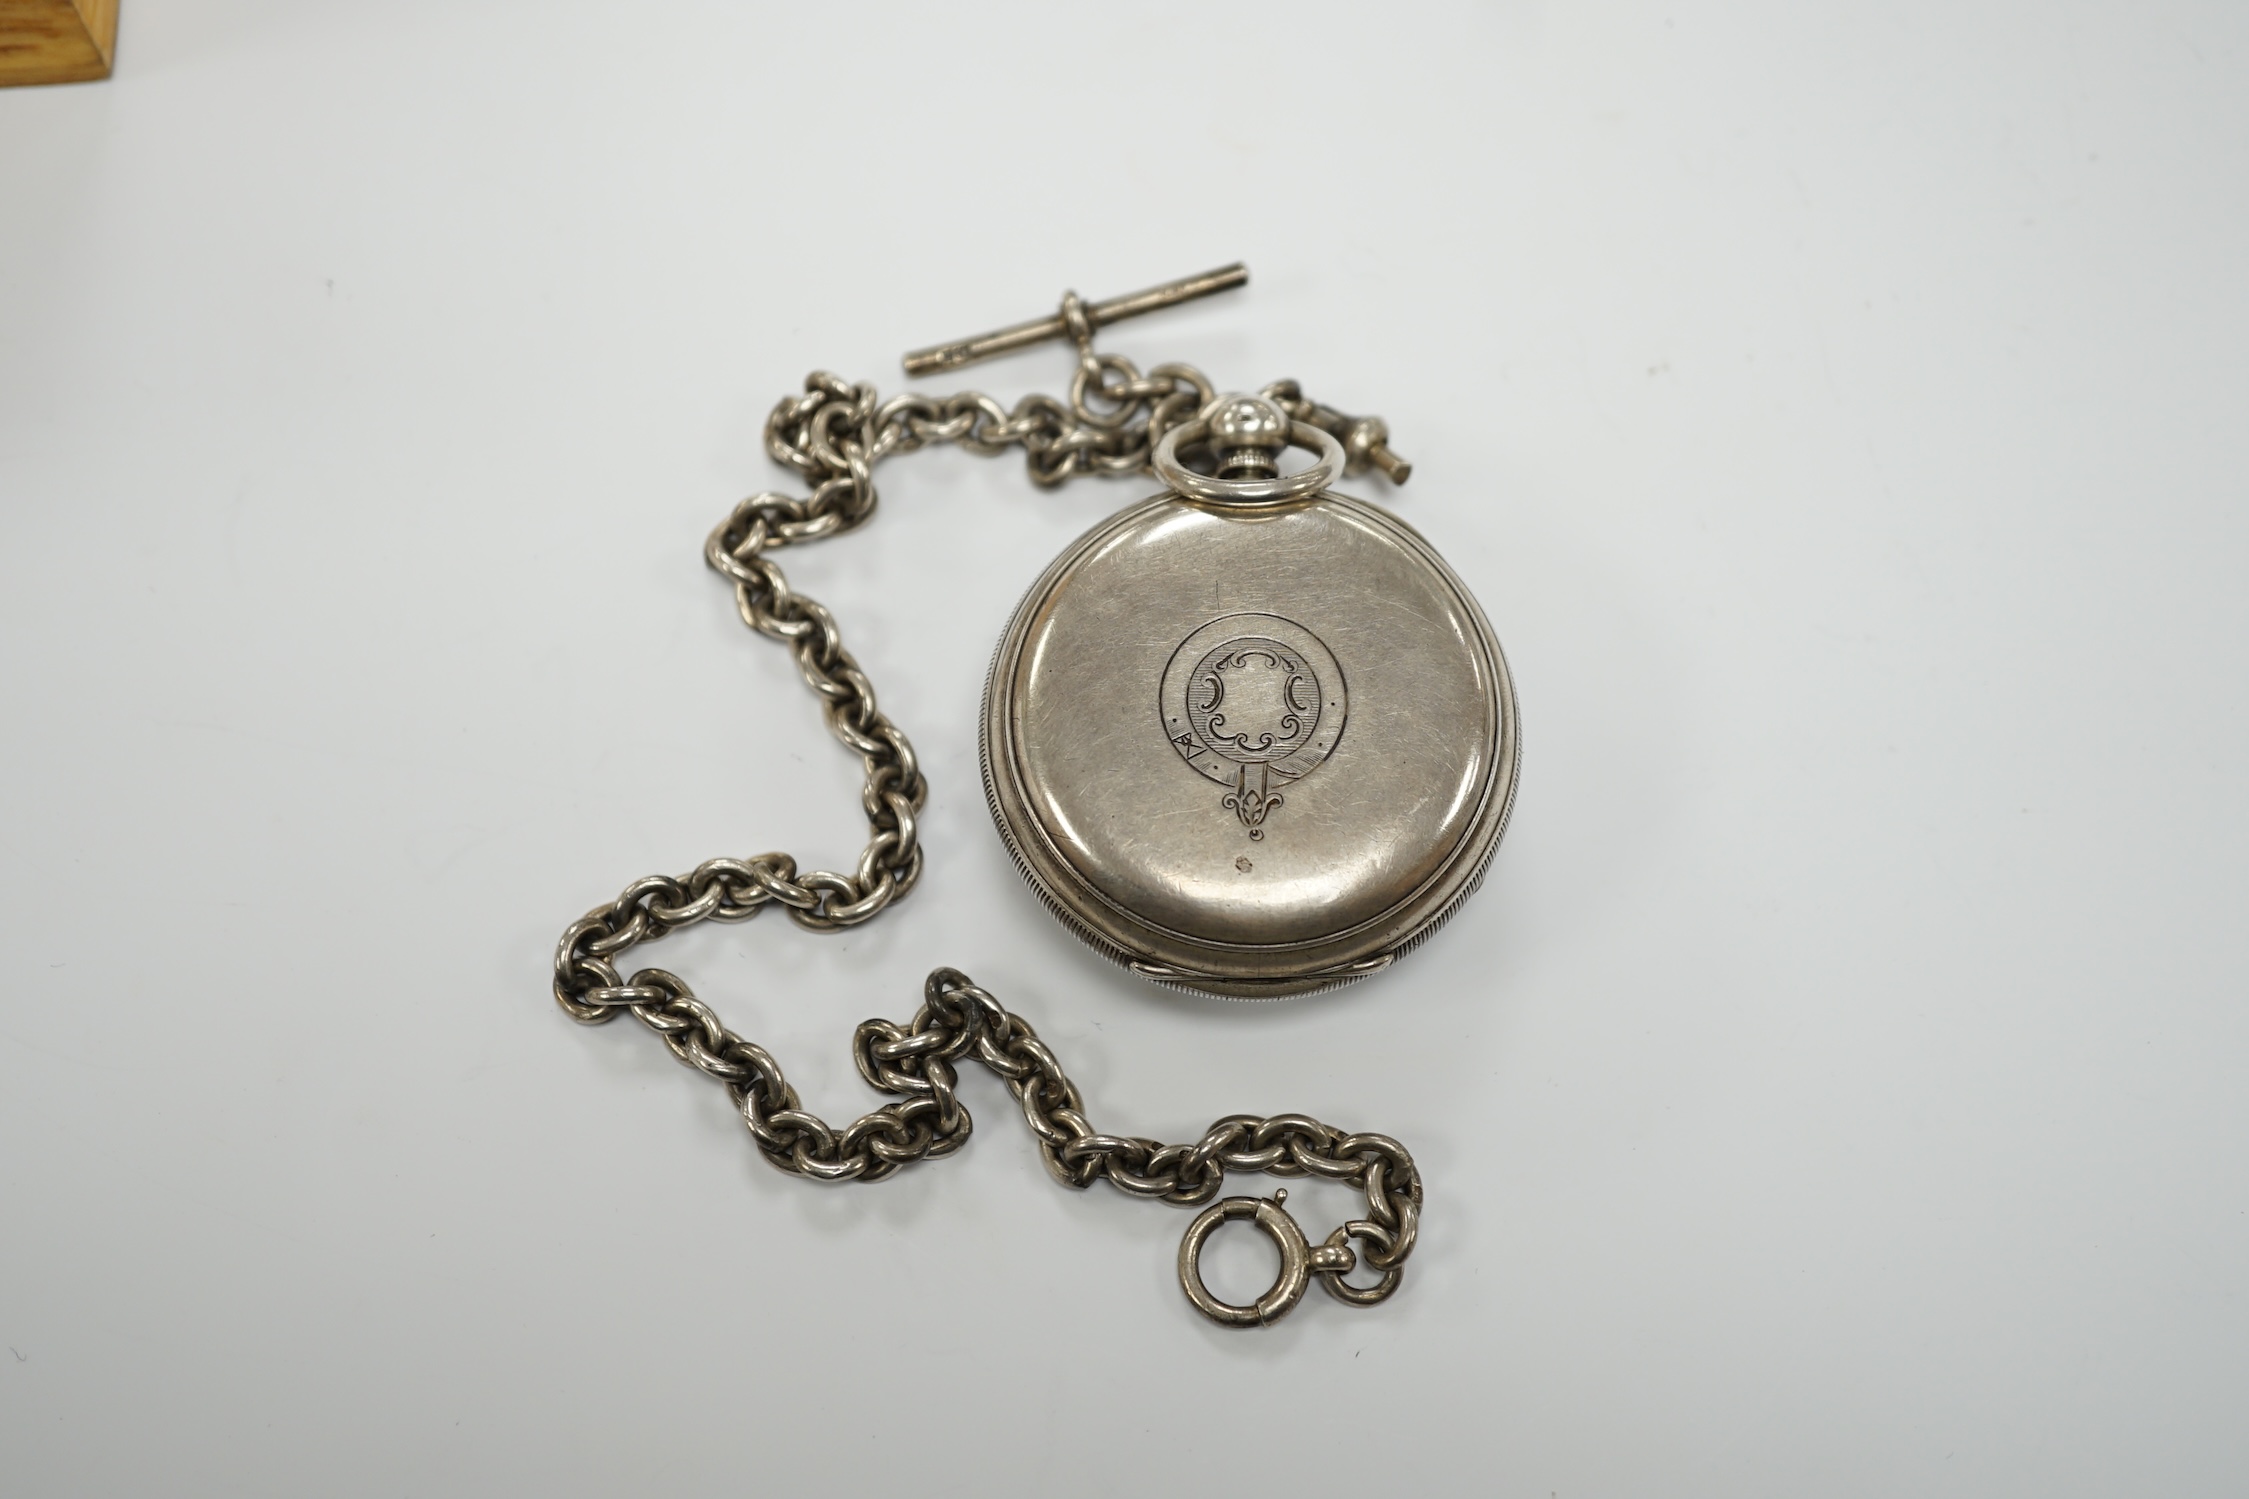 A Victorian silver open face pocket watch by Gaydon of Barnstaple and a silver albert.